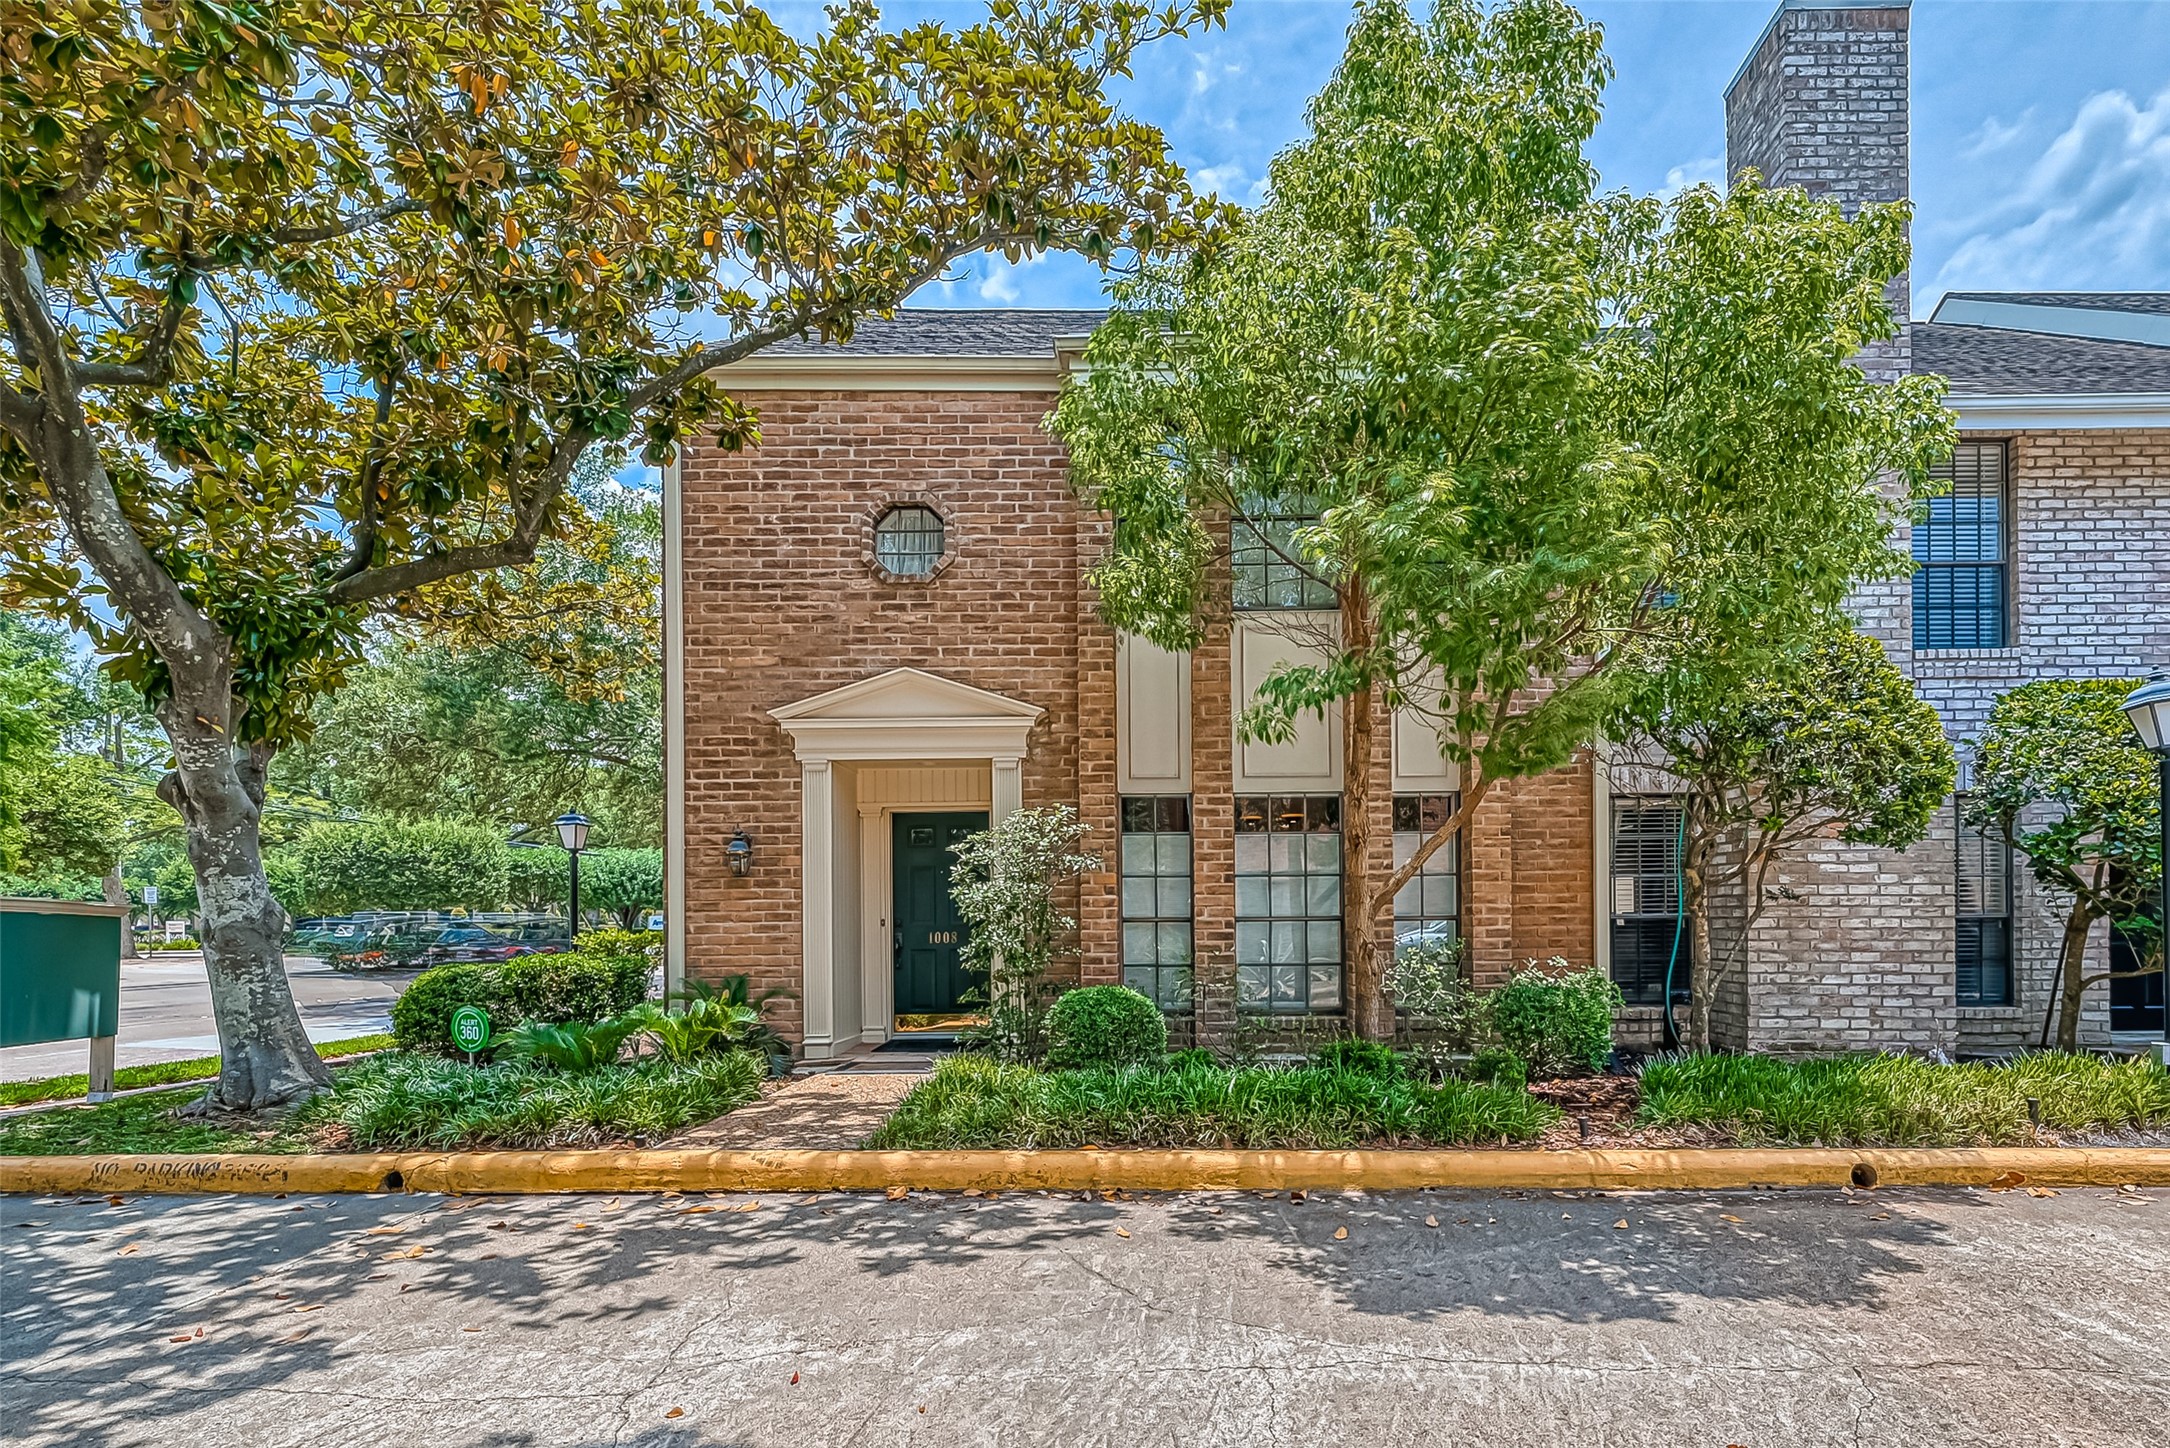 Beautiful traditional elevation in the heart of the Galleria Area.